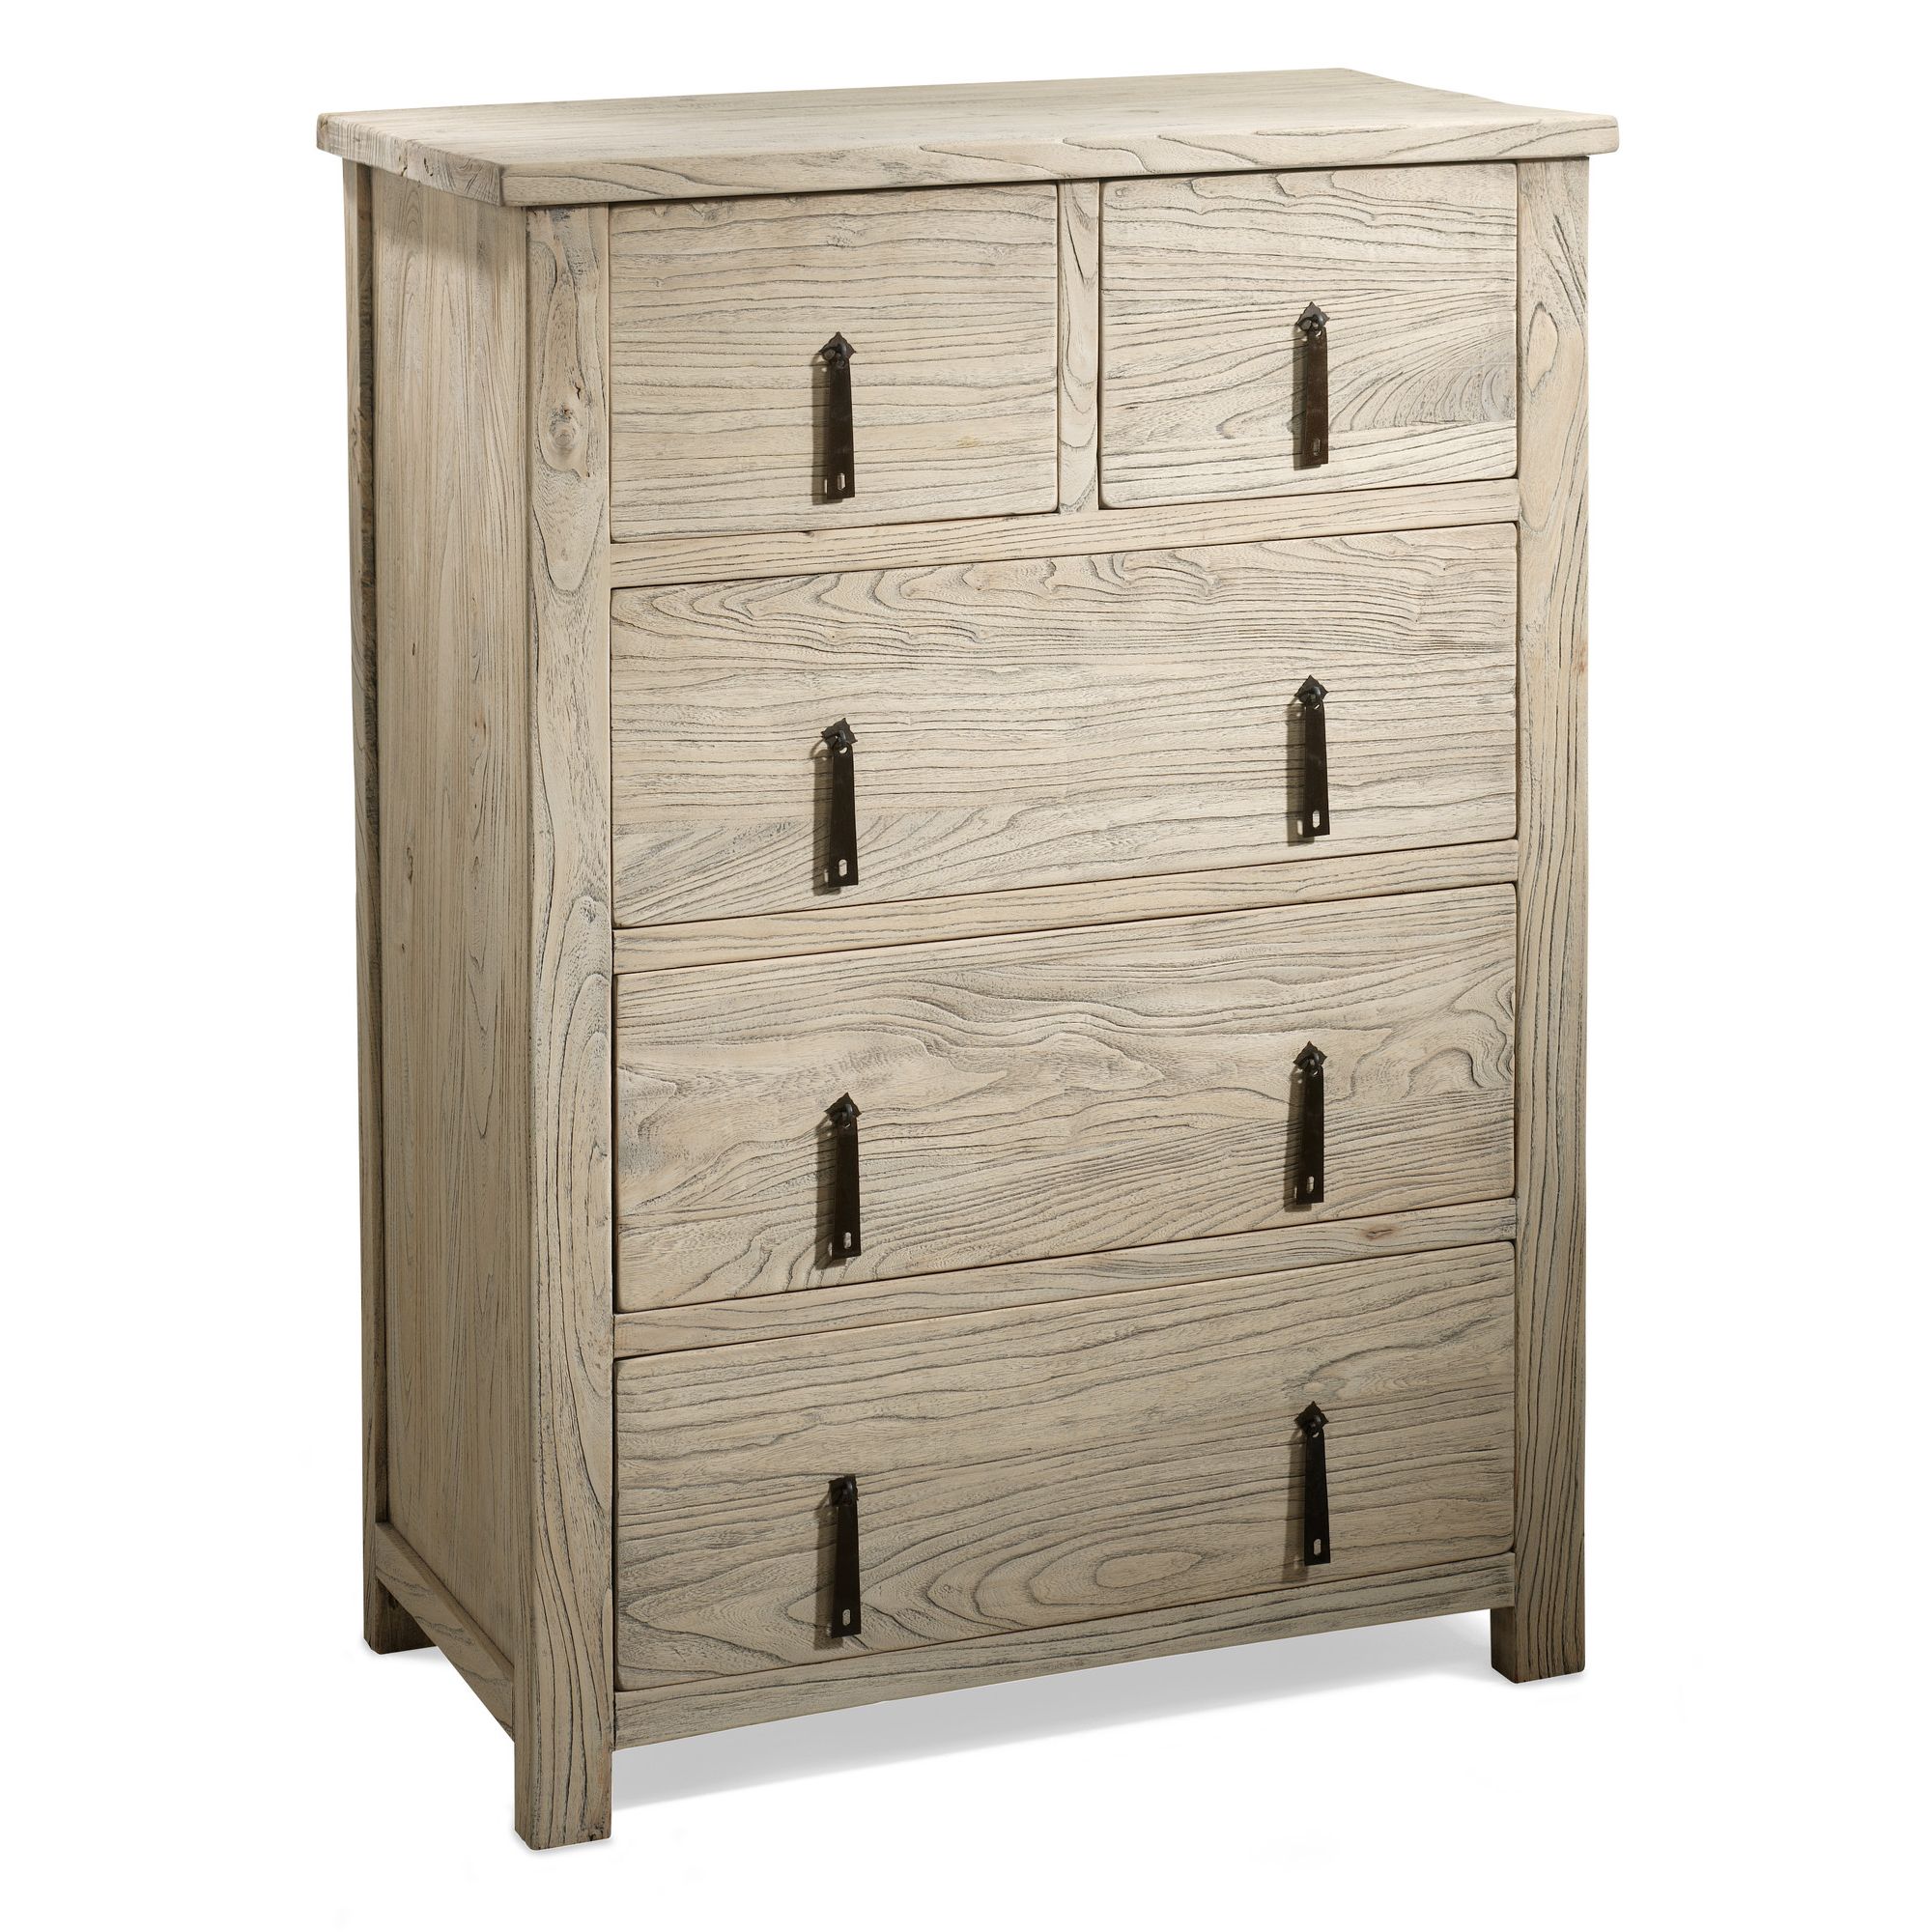 Shimu Chinese Country Furniture Five Drawer Chest at Tesco Direct